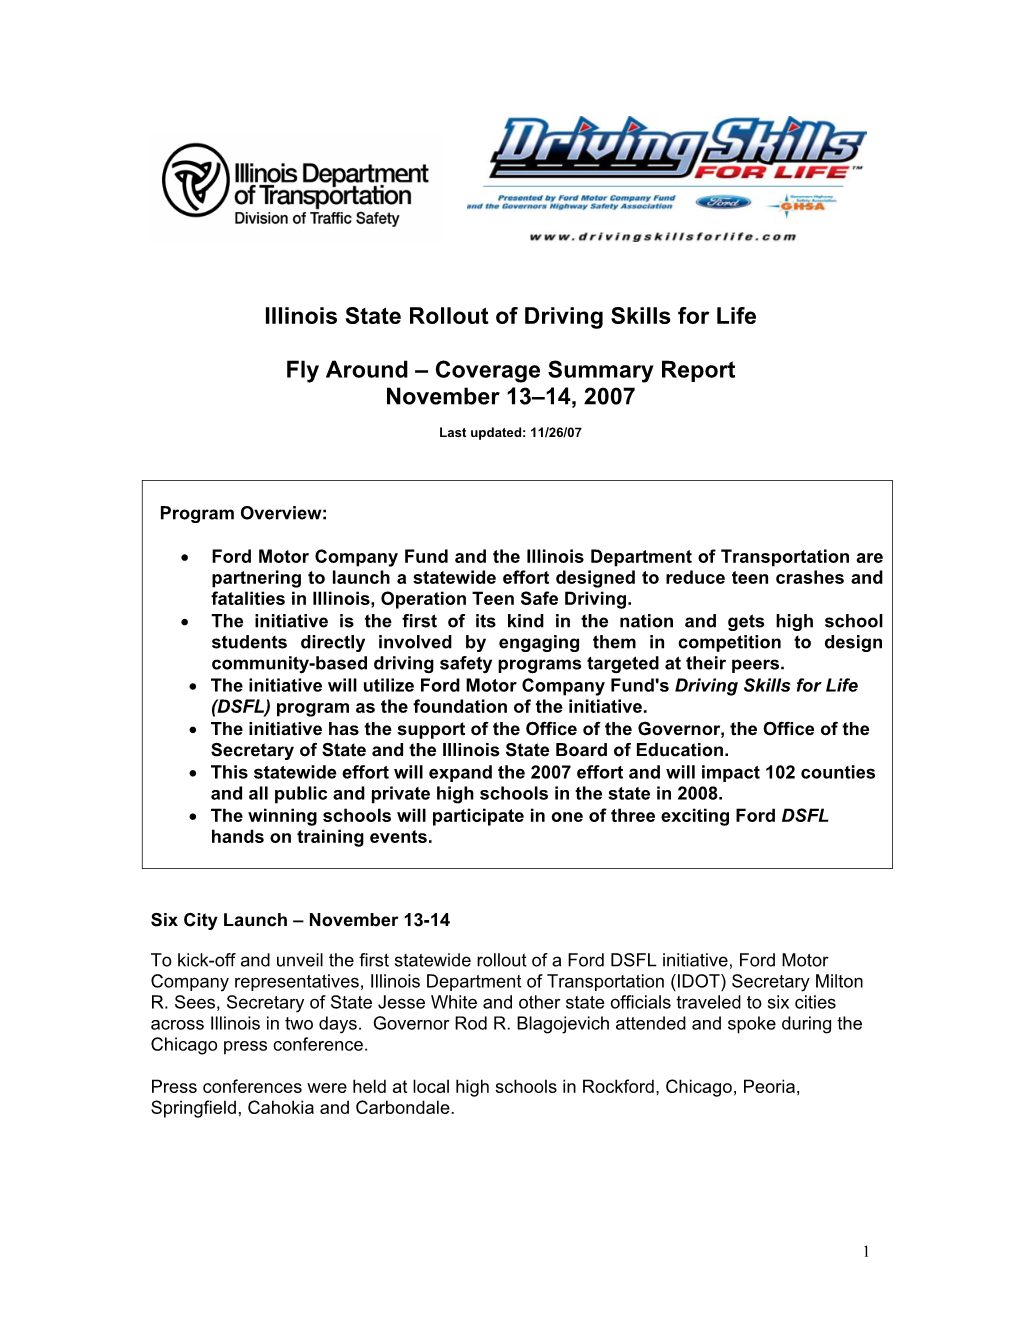 Illinois State Rollout of Driving Skills for Life Fly Around